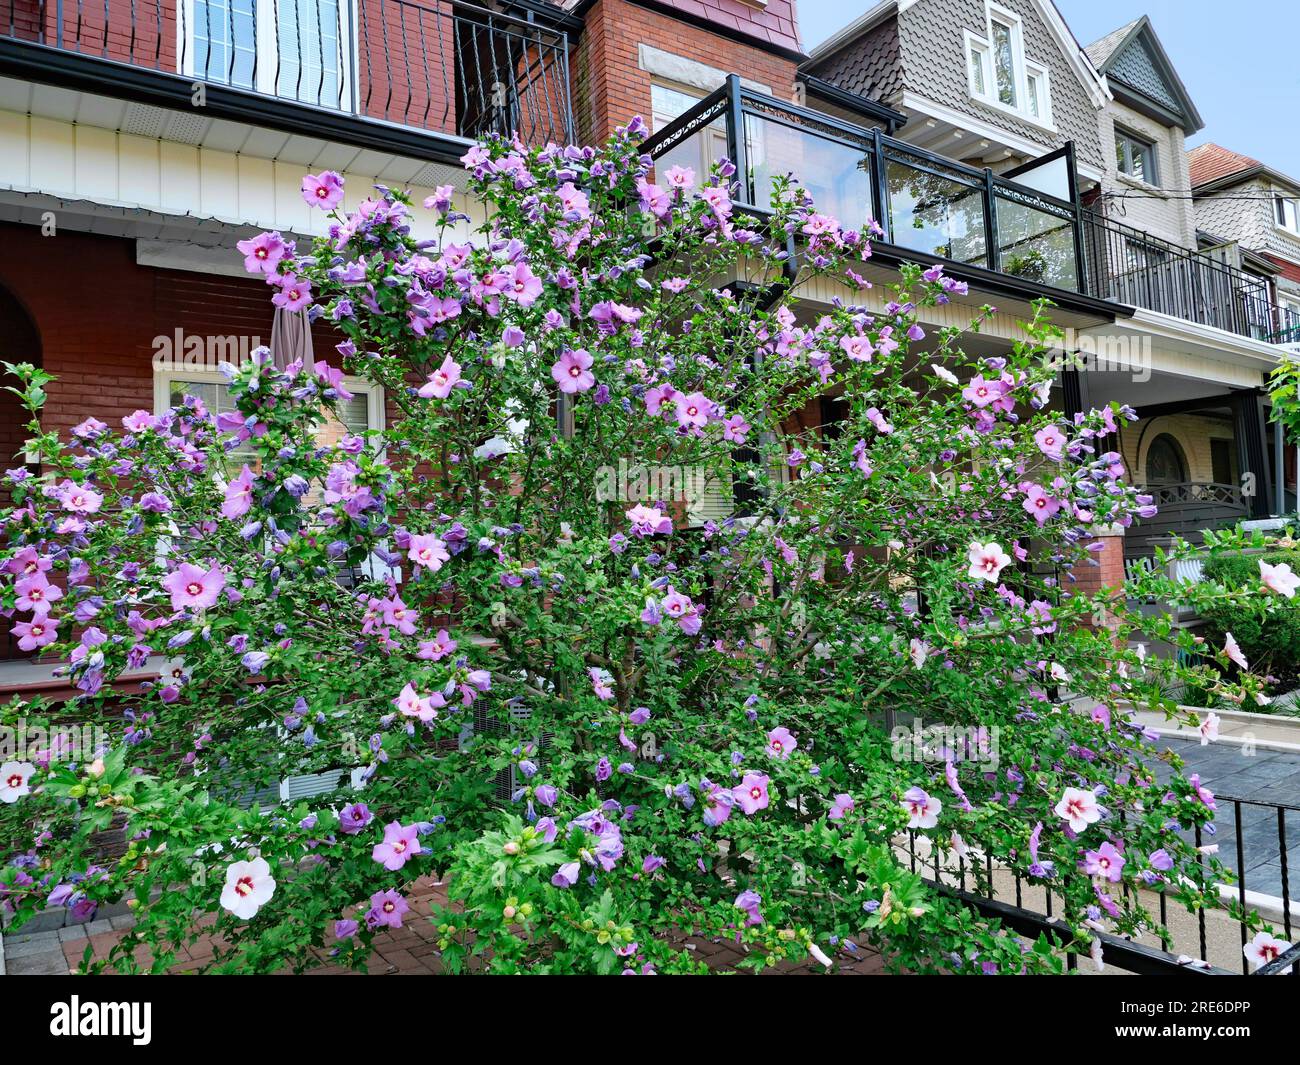 residential street with flowers in front garden Stock Photo